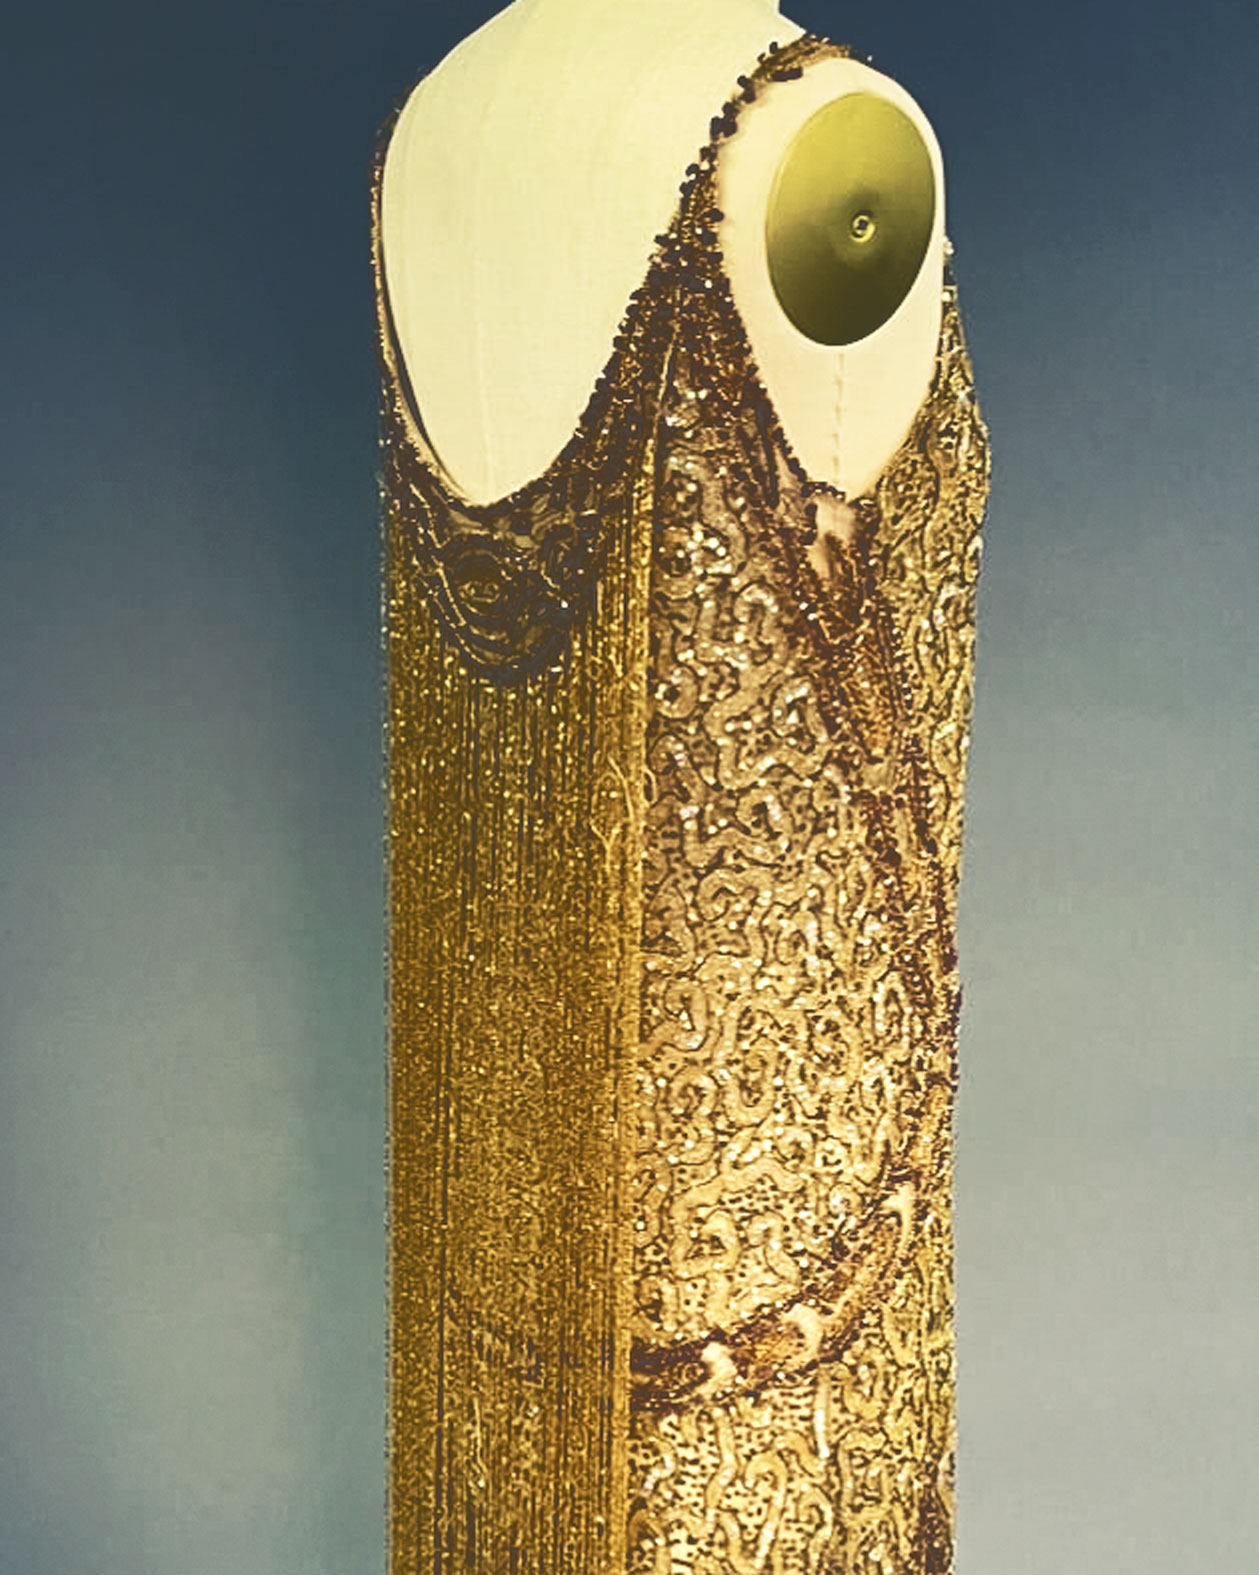 A gold beaded dress from the 1920s.